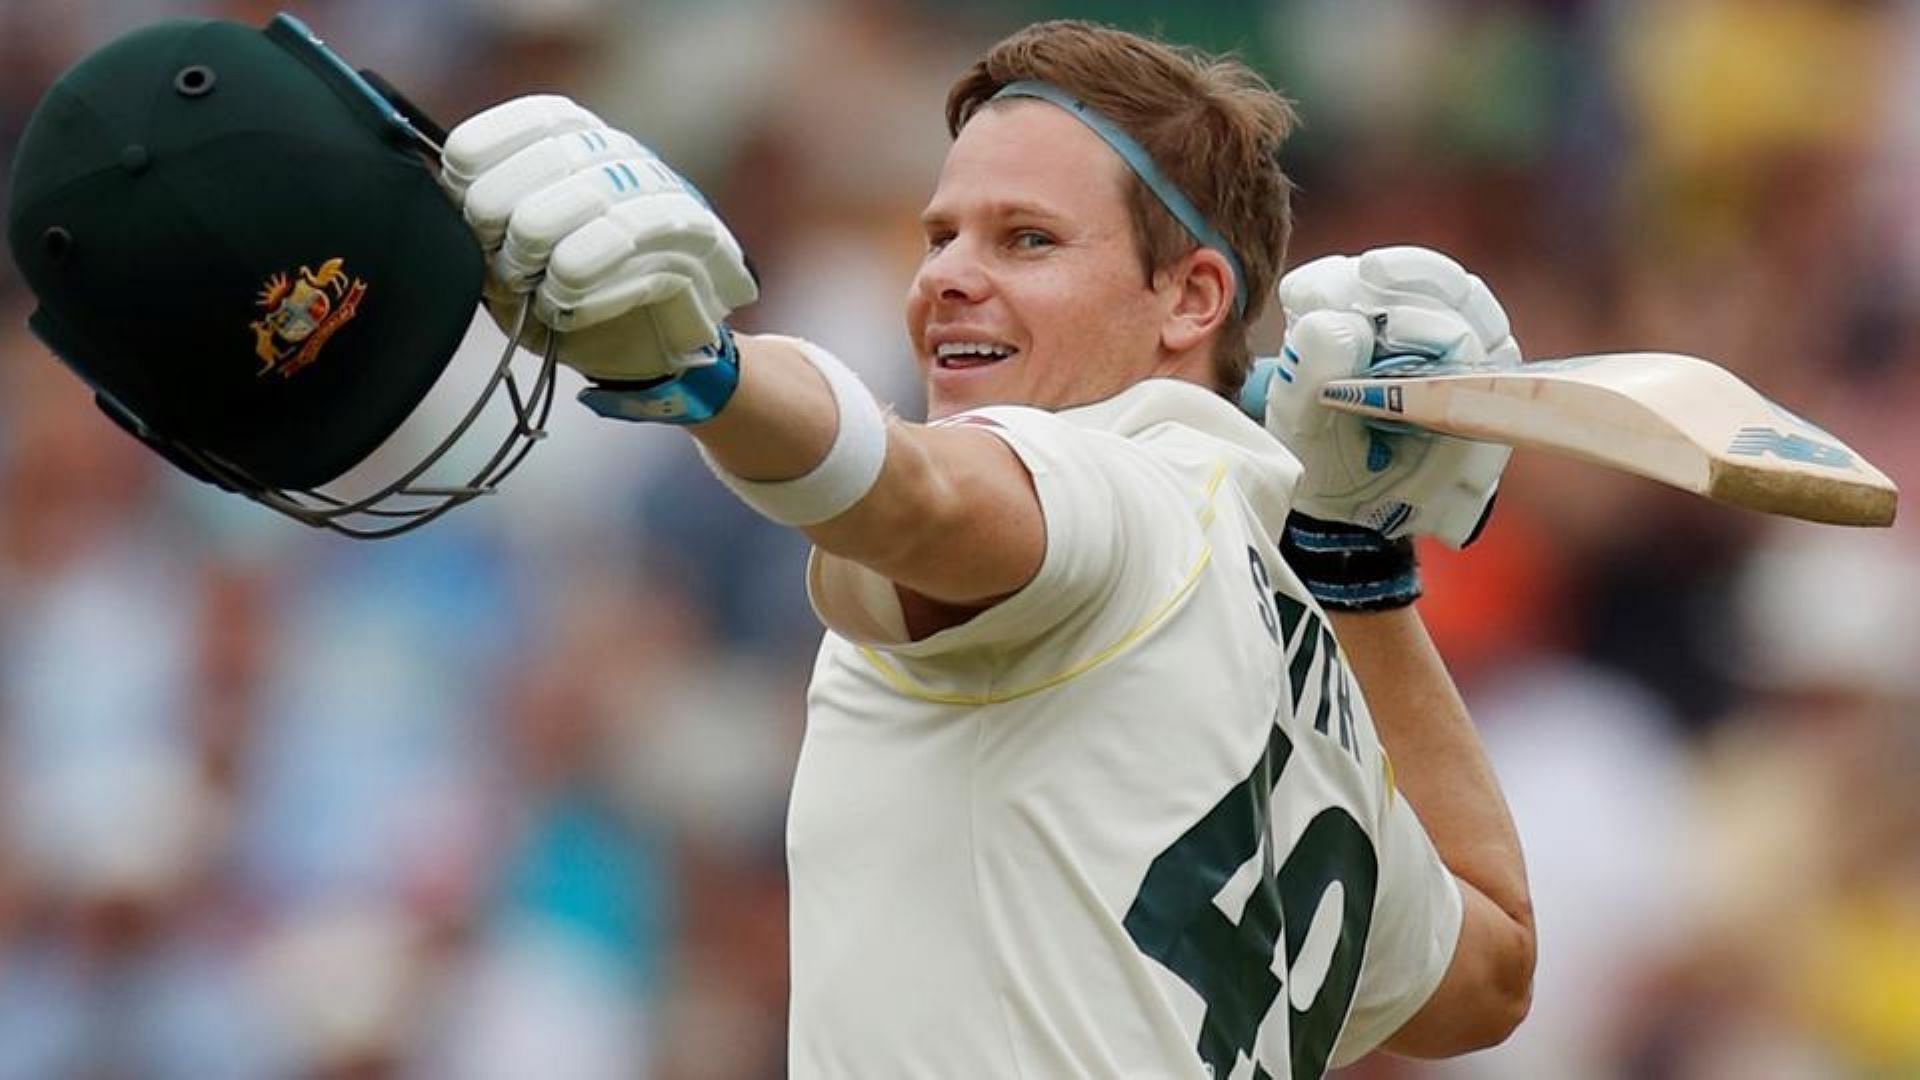 Steve Smith tormented the English bowlers in the 2019 Ashes series